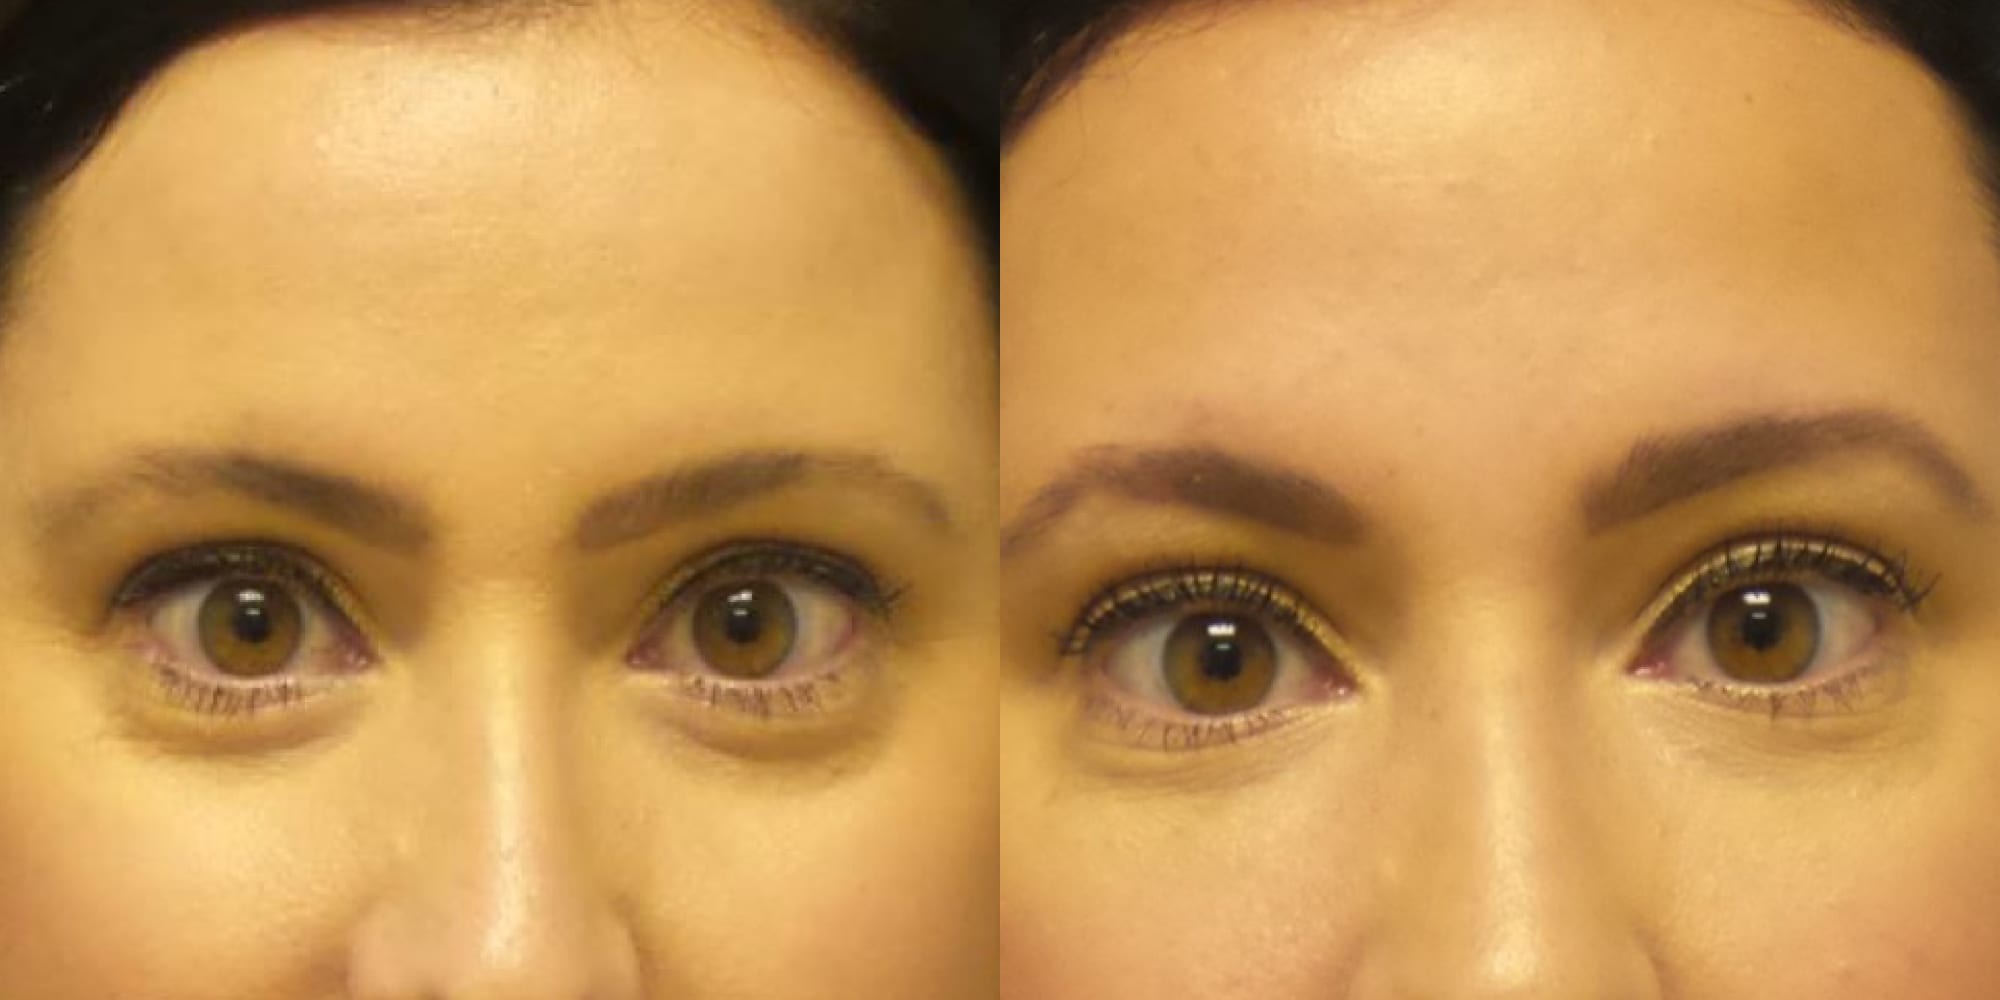 Hughes Center before and after filler woman